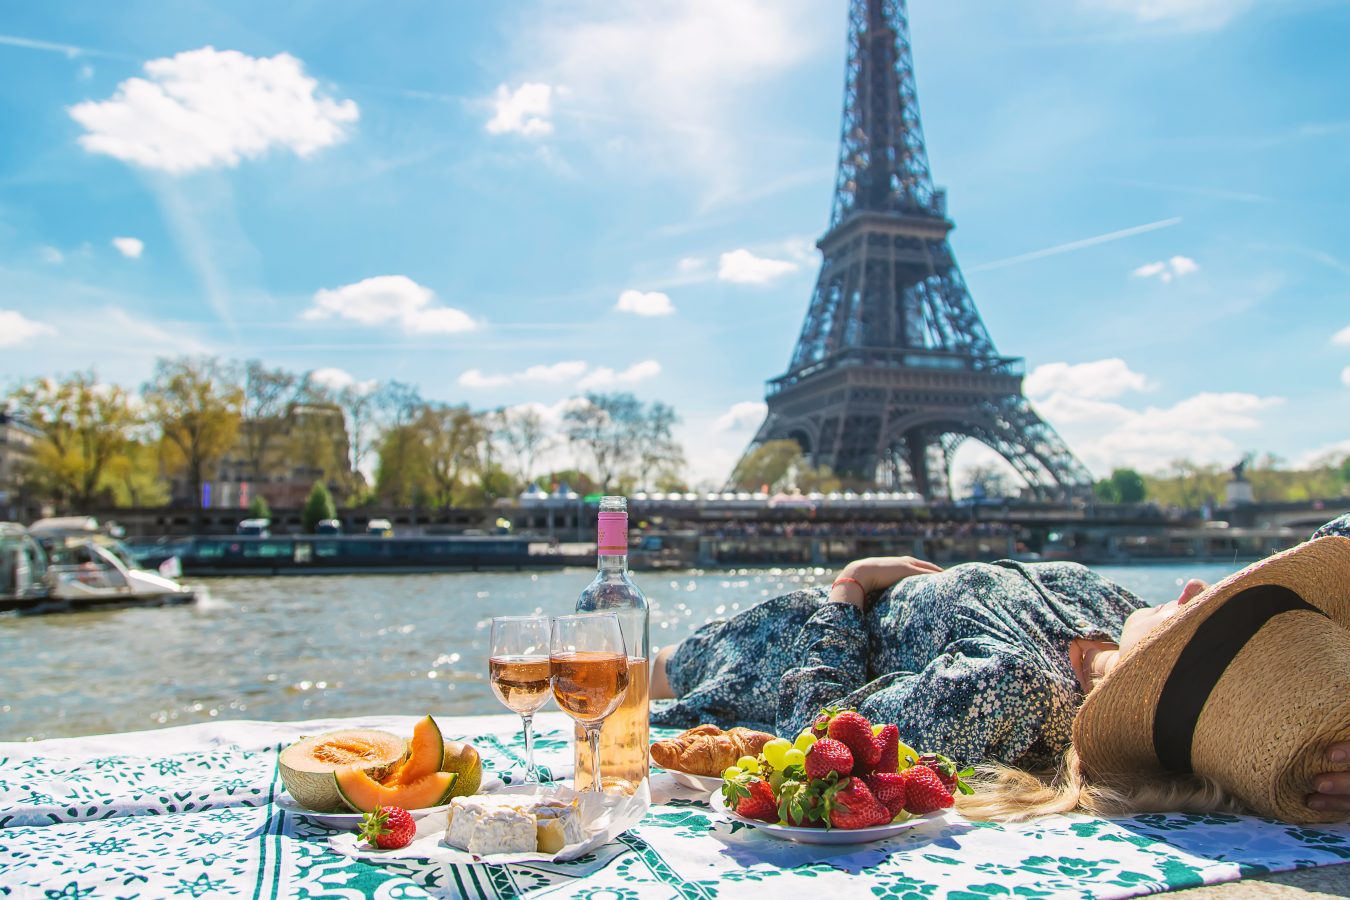 A woman lays on a blanket with a picnic spread next to here along the river in front of the 
Eiffel Tower in Paris.